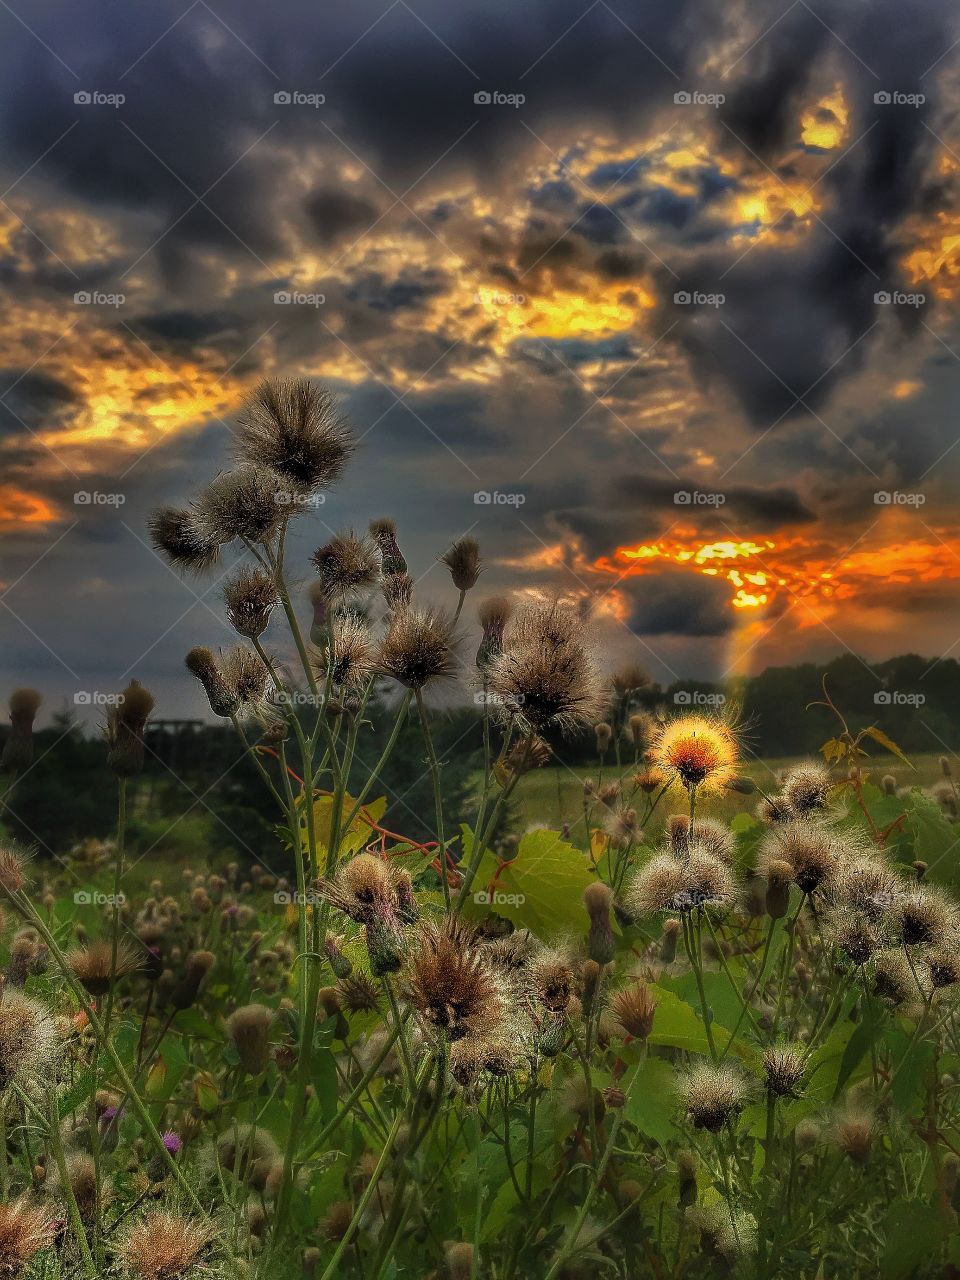 Wild flowers and a sunbeam . Budding dandelions look amazing under a sunset. 